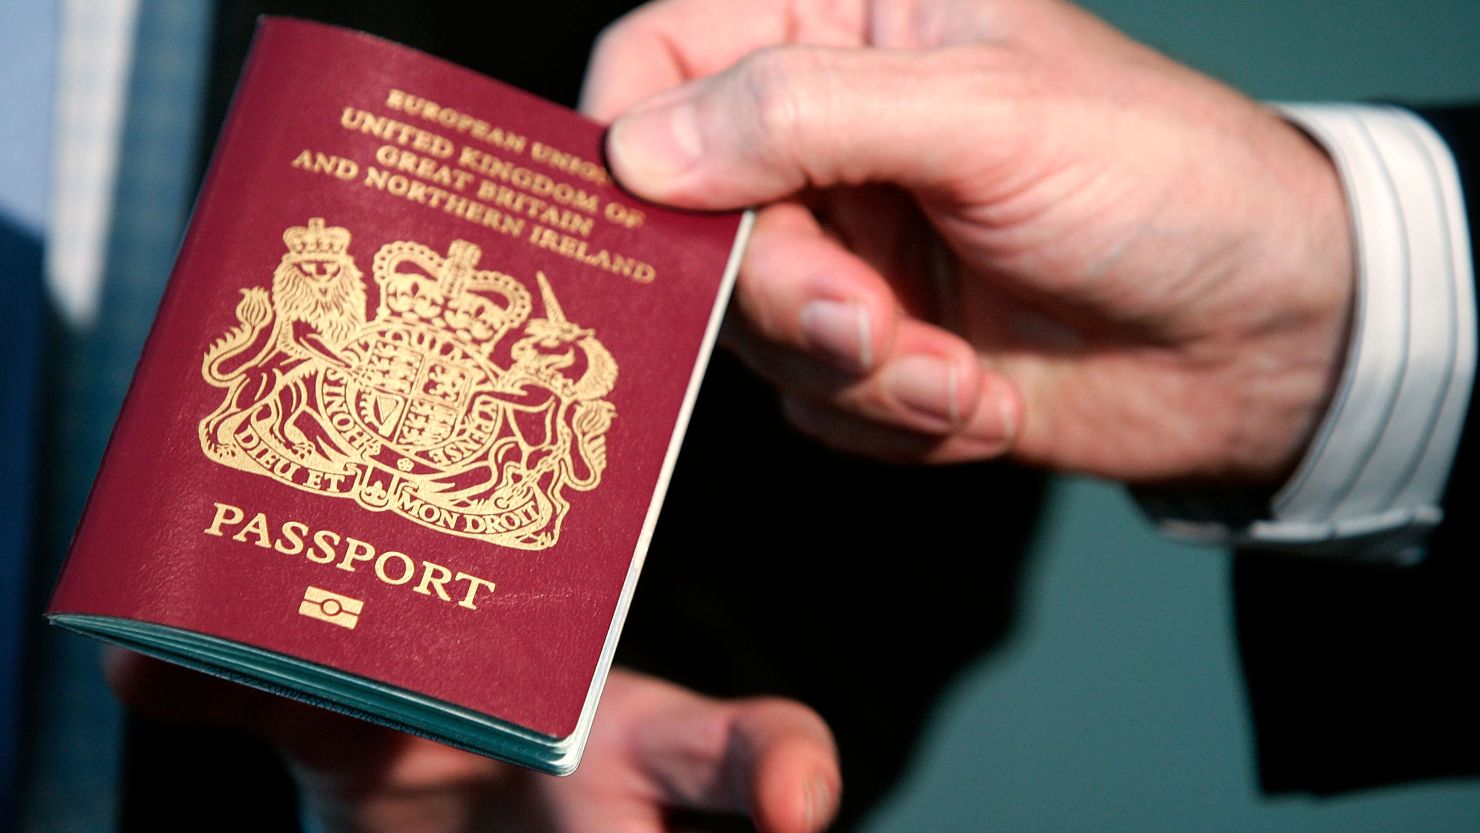 British politicians are debating whether they should take the passports of jihadis away, effectively banning them from the UK.